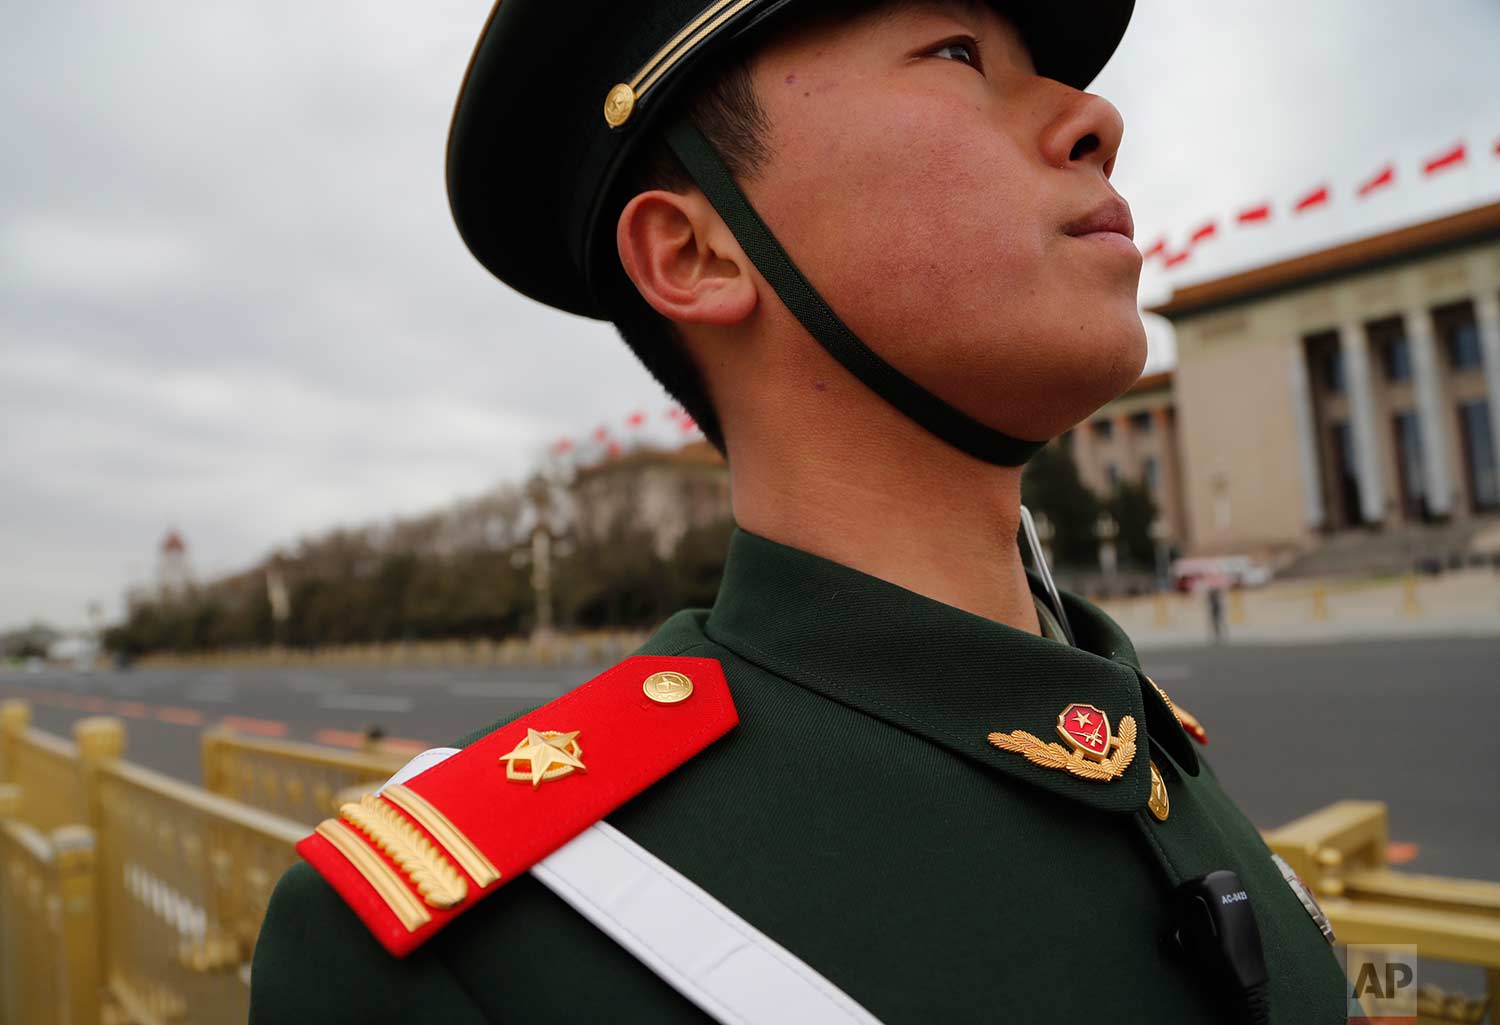  In this Thursday, March 15, 2018 photo, a Chinese paramilitary policeman wears a red epaulette on his shoulder as he stands guard during the closing session of the Chinese People's Political Consultative Conference (CPPCC) at the Great Hall of the P